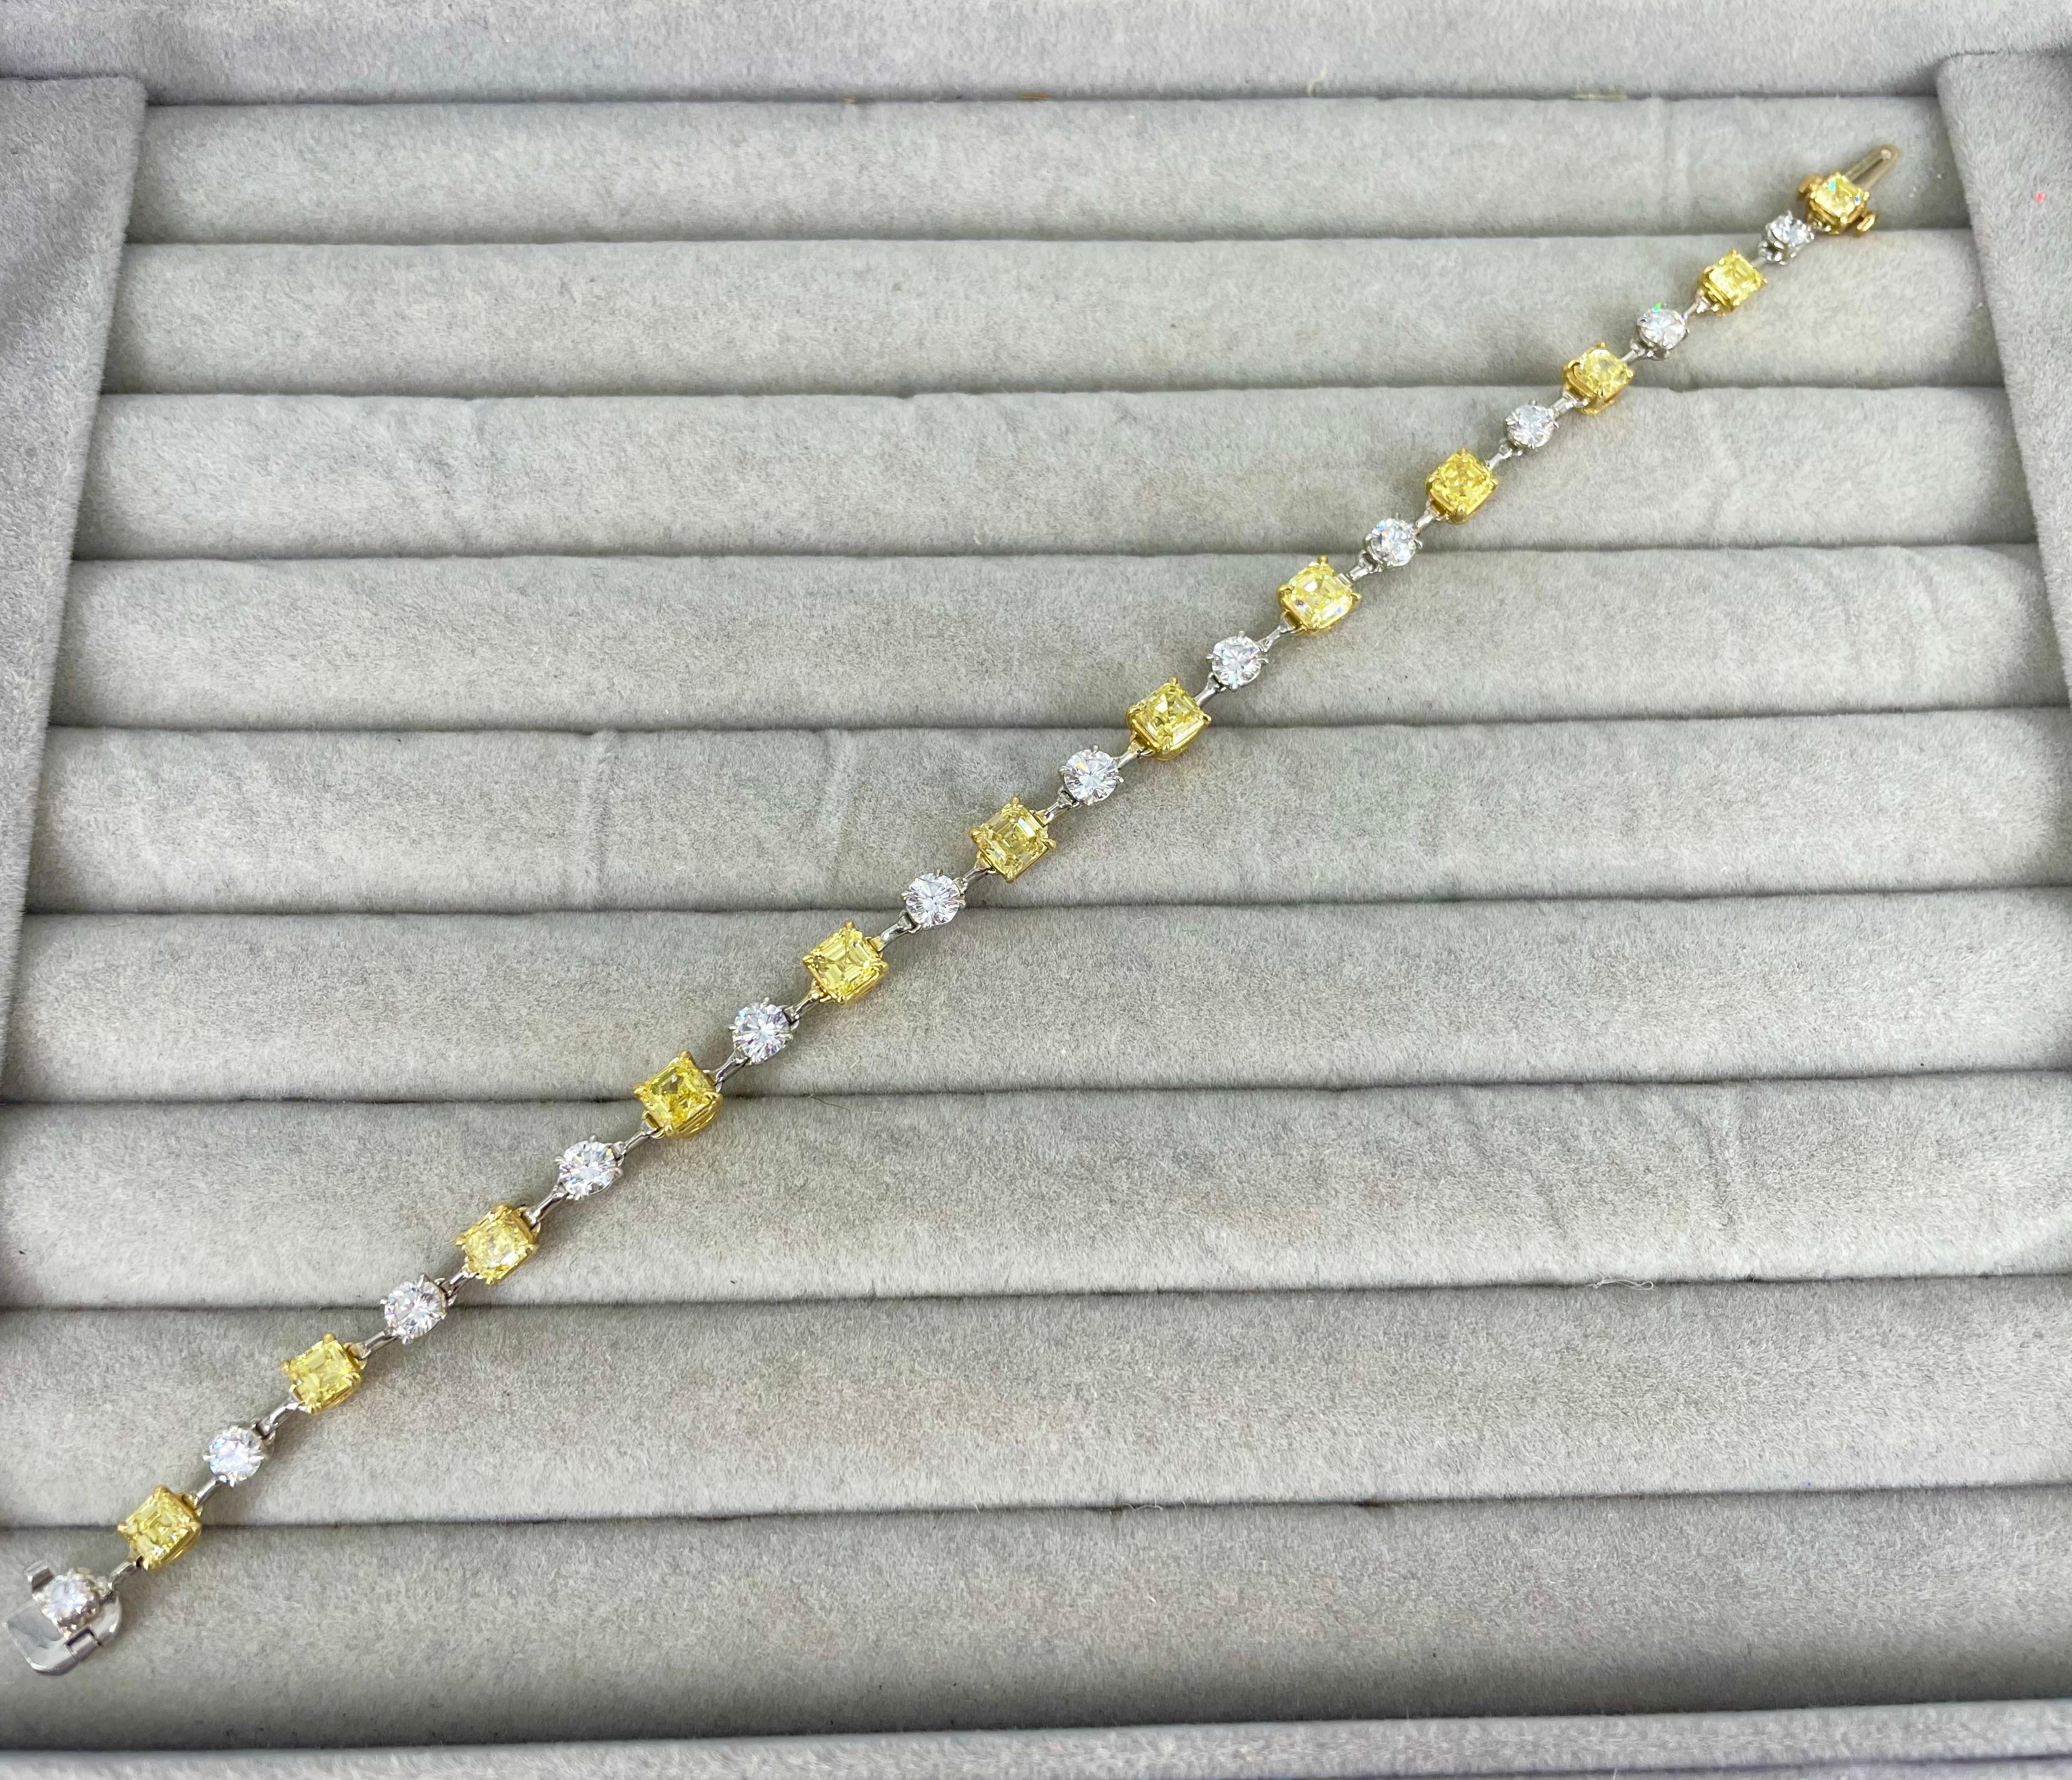 This exceptional yellow and white diamond bracelet by J. Birnbach is a sophisticated and unique way to add yellow diamonds to your jewelry wardrobe! Featuring 6.18 carats of fancy intense yellow asscher cuts that alternate with 2.39 carats of white